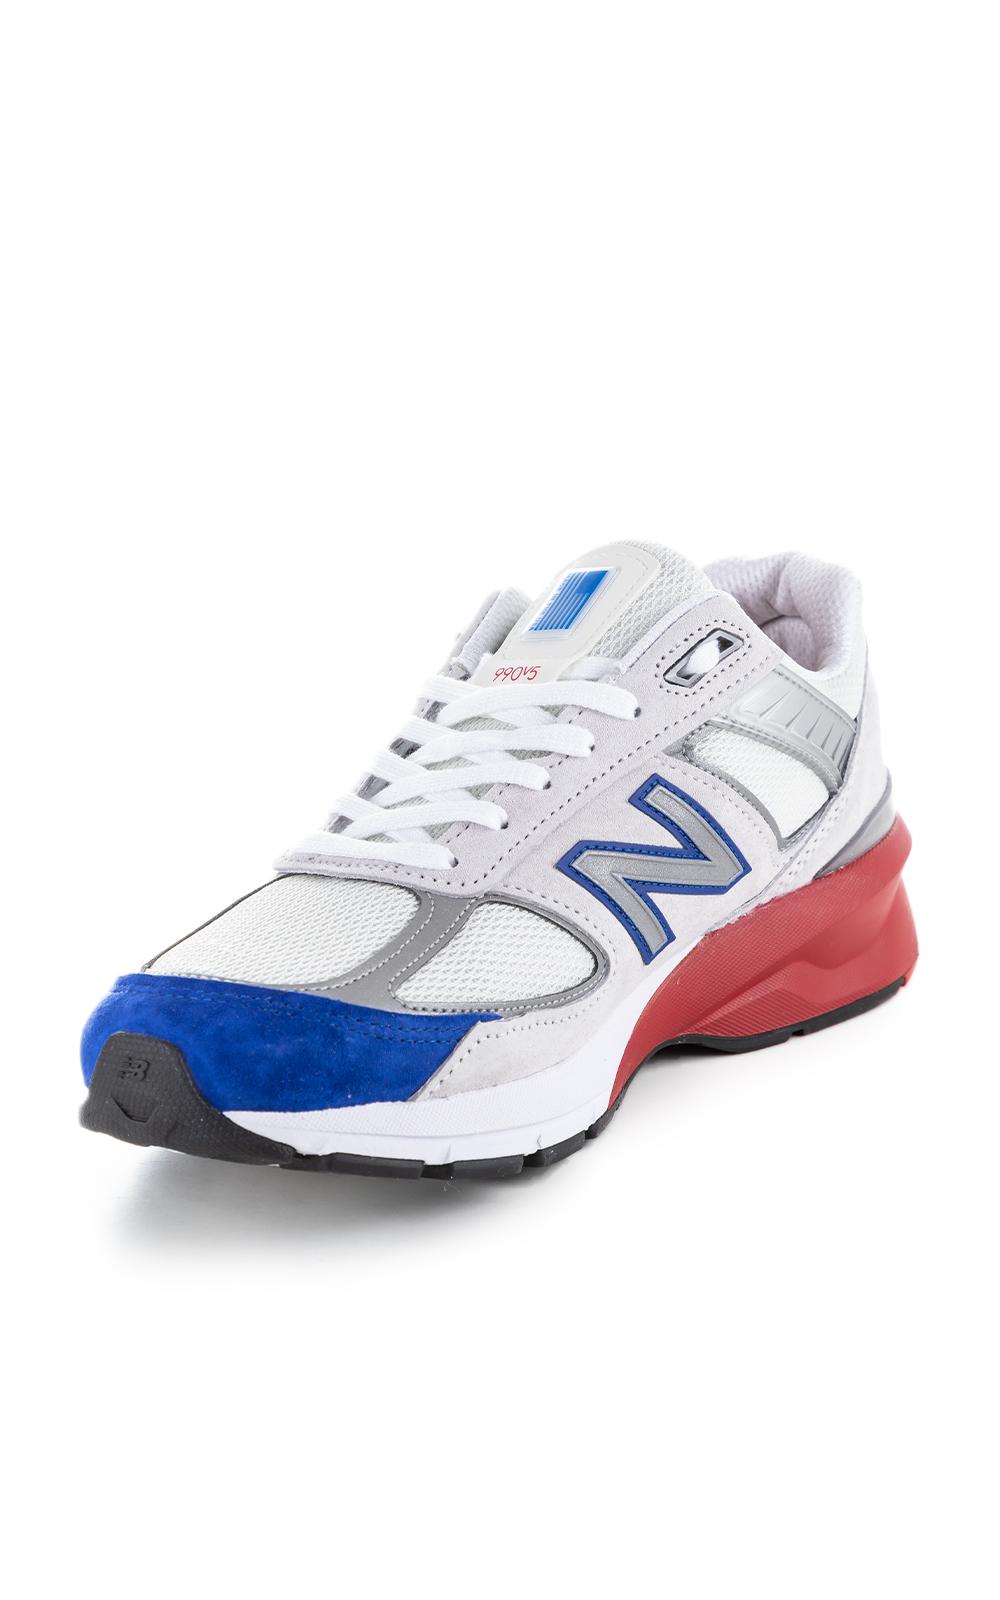 New Balance Suede M990 Nb5 White/red/blue 